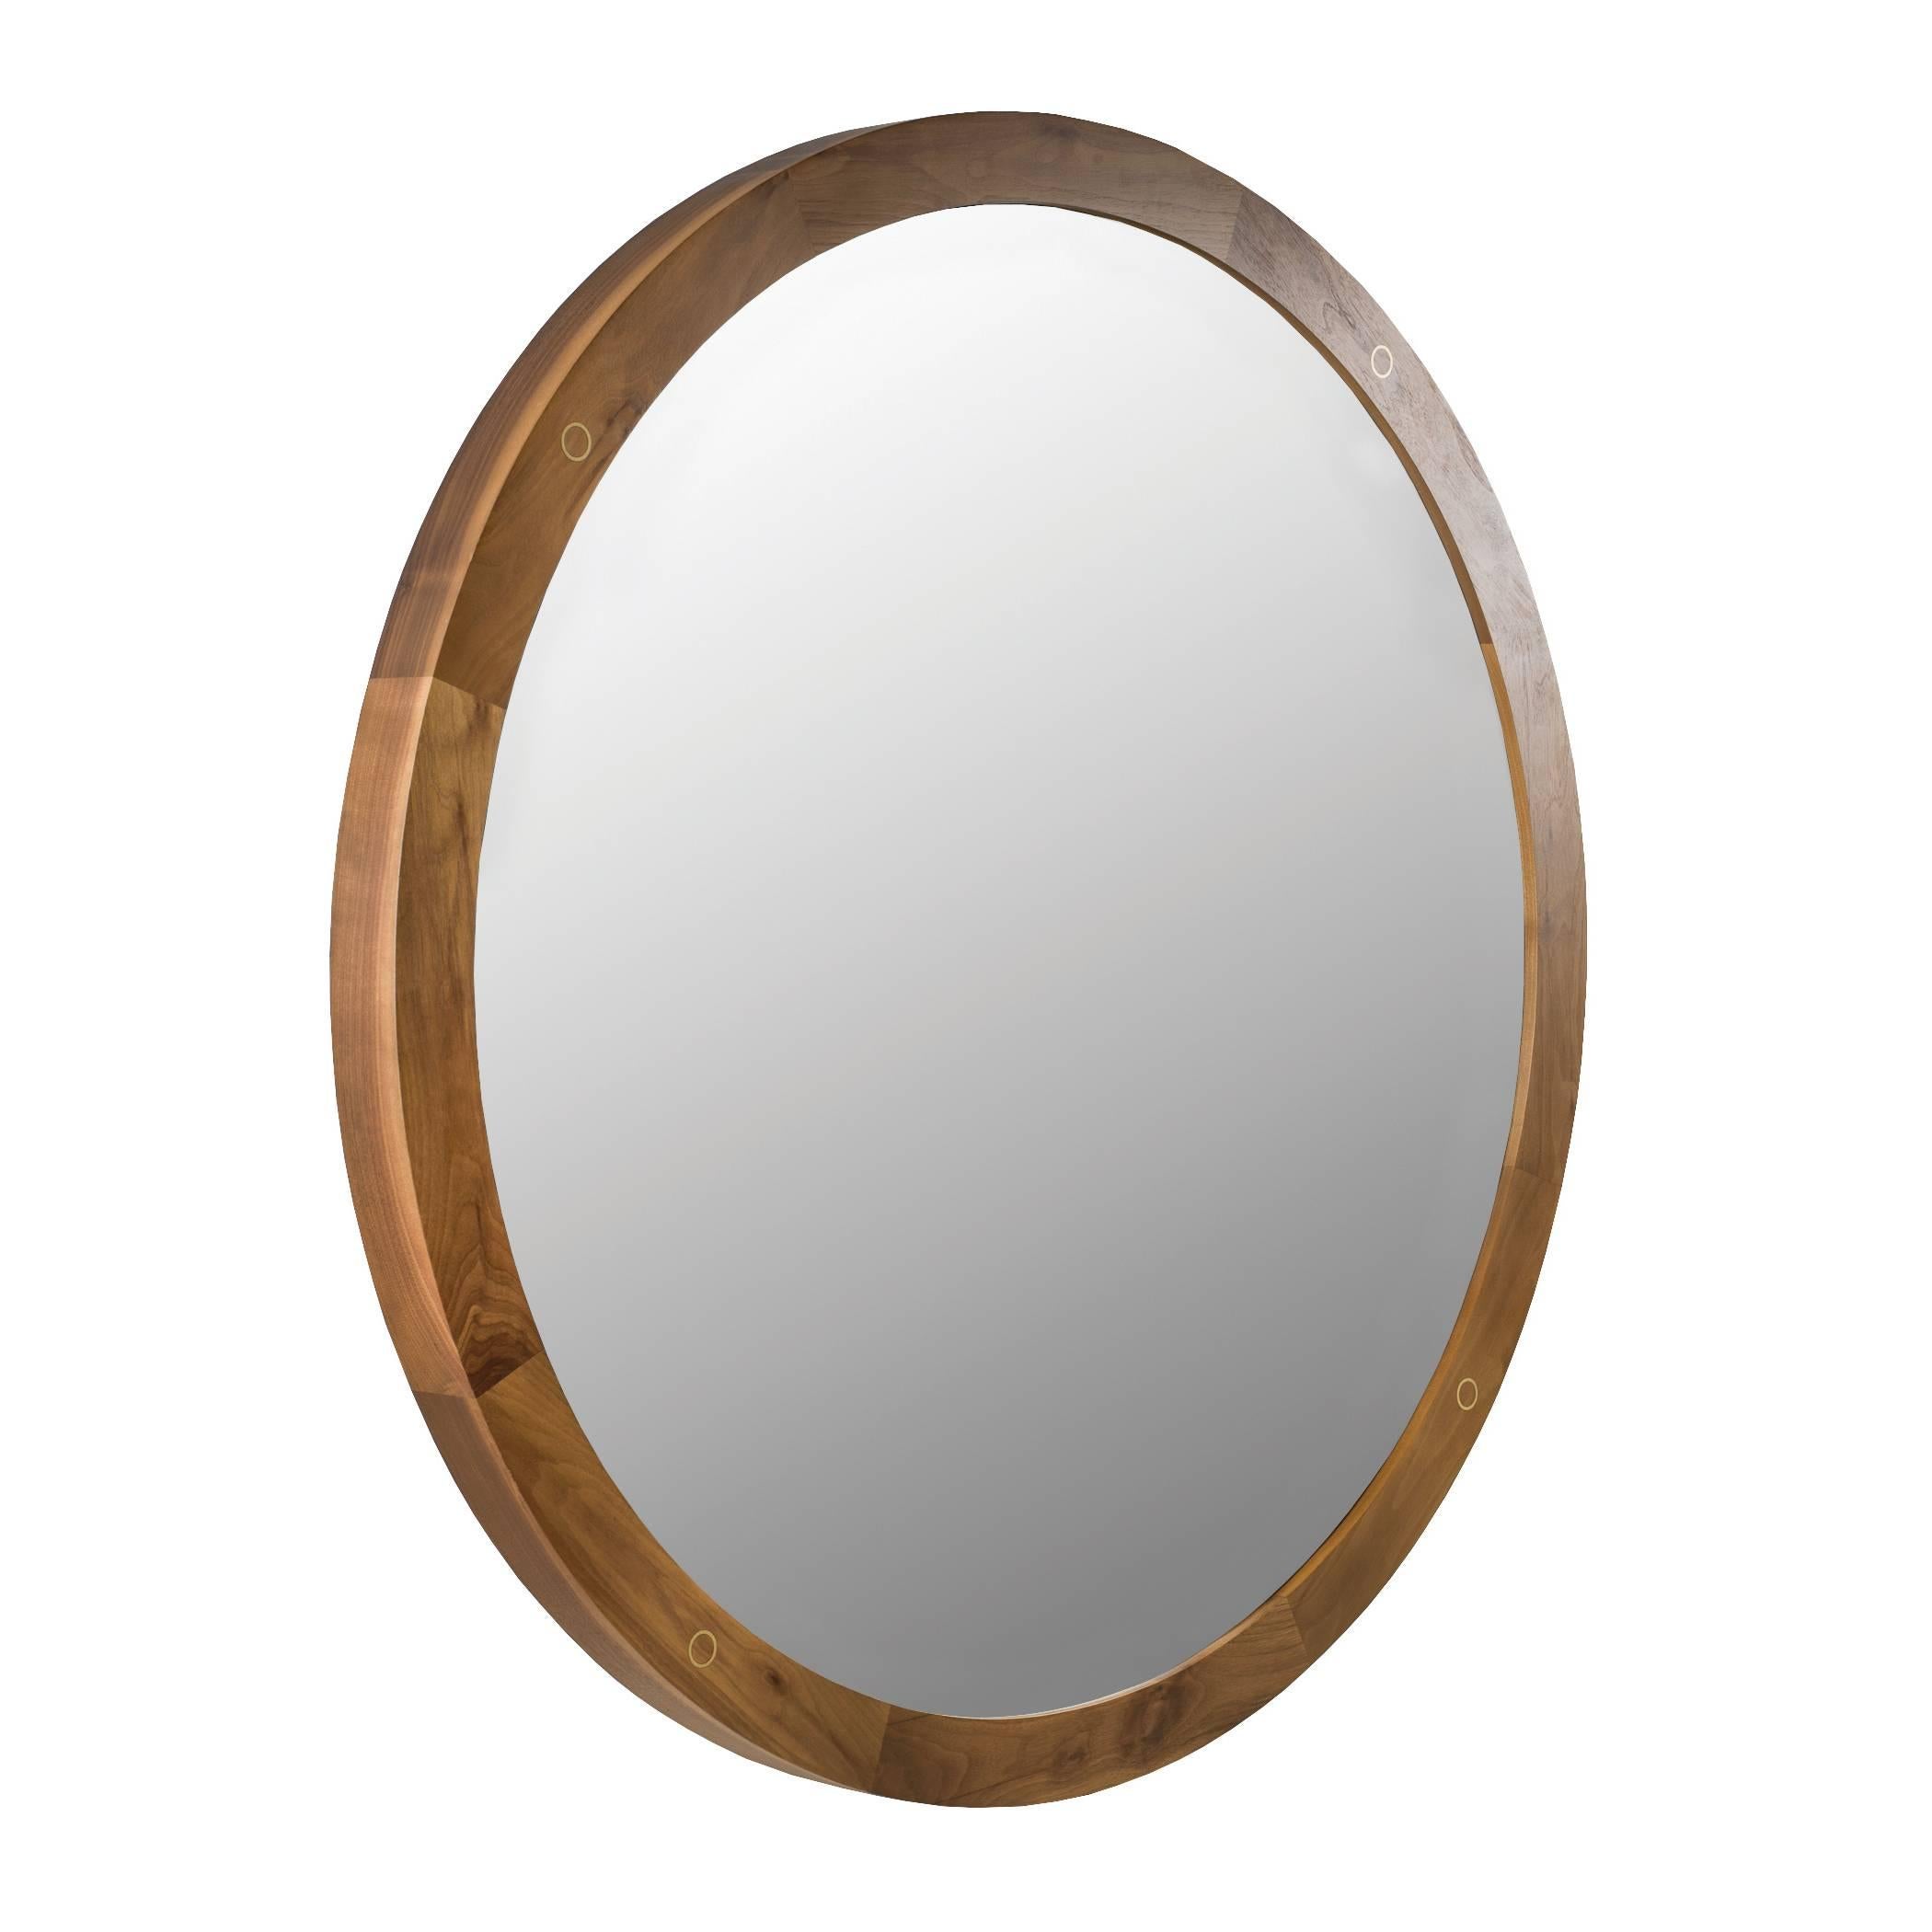 The Fulton mirror blends all natural American walnut with high grade hand-cut matte brass details.

Shown in natural walnut, clear mirror and matte brass. 
48 in diameter × 2.75 in depth.

**Each Desiron piece is handcrafted in the U.S.A.,